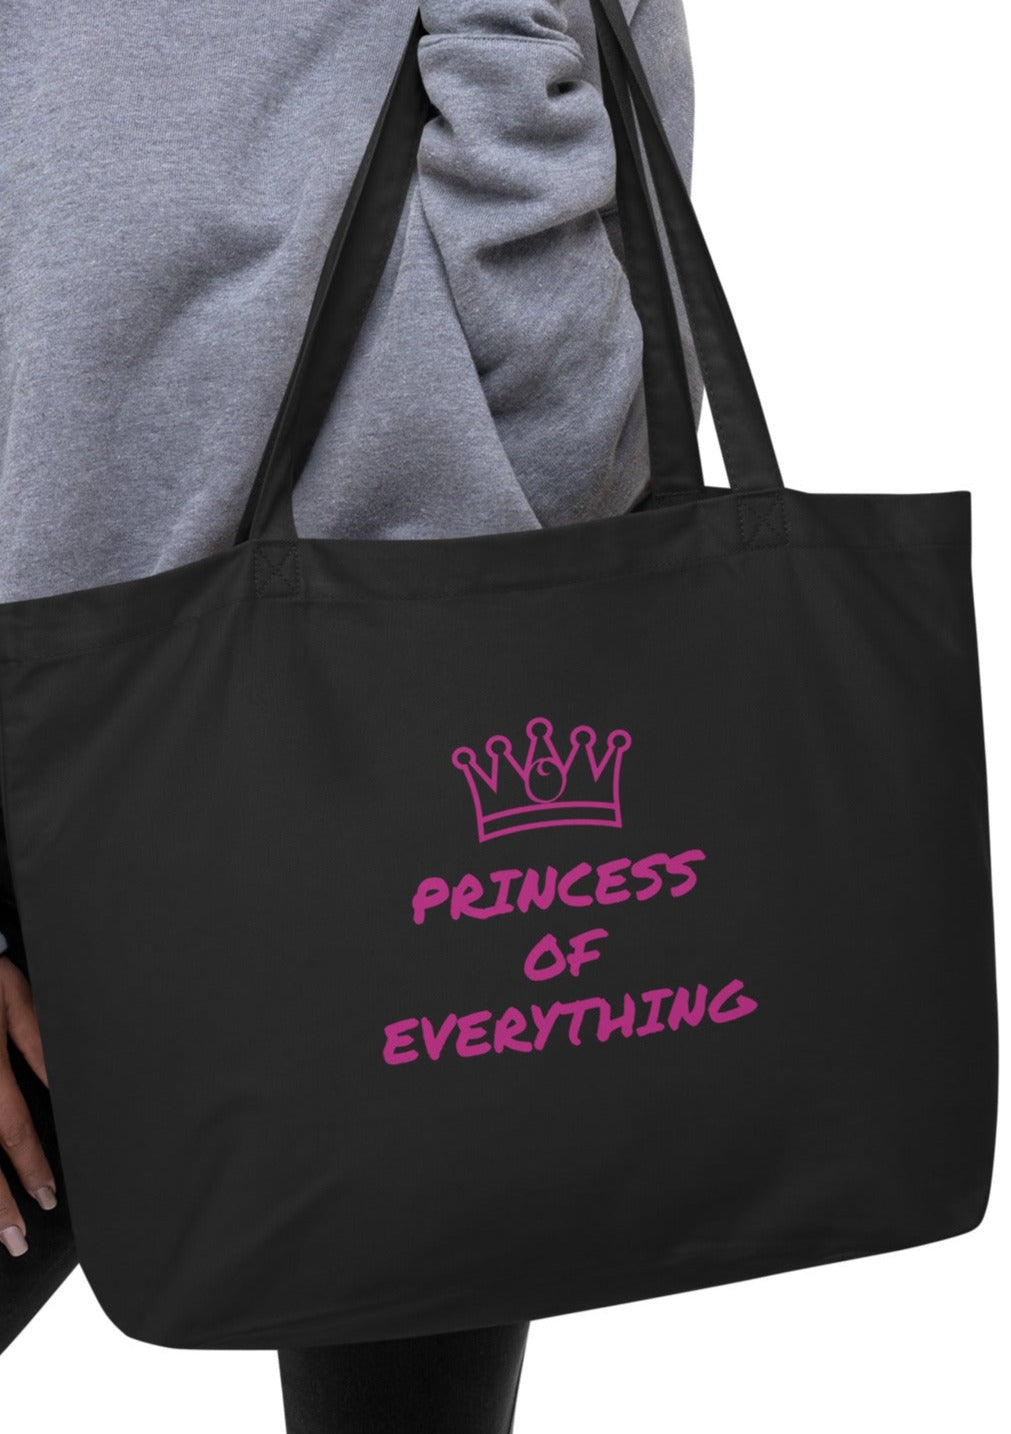 Princess of Everything Travel Tote - On the Go with Princess O